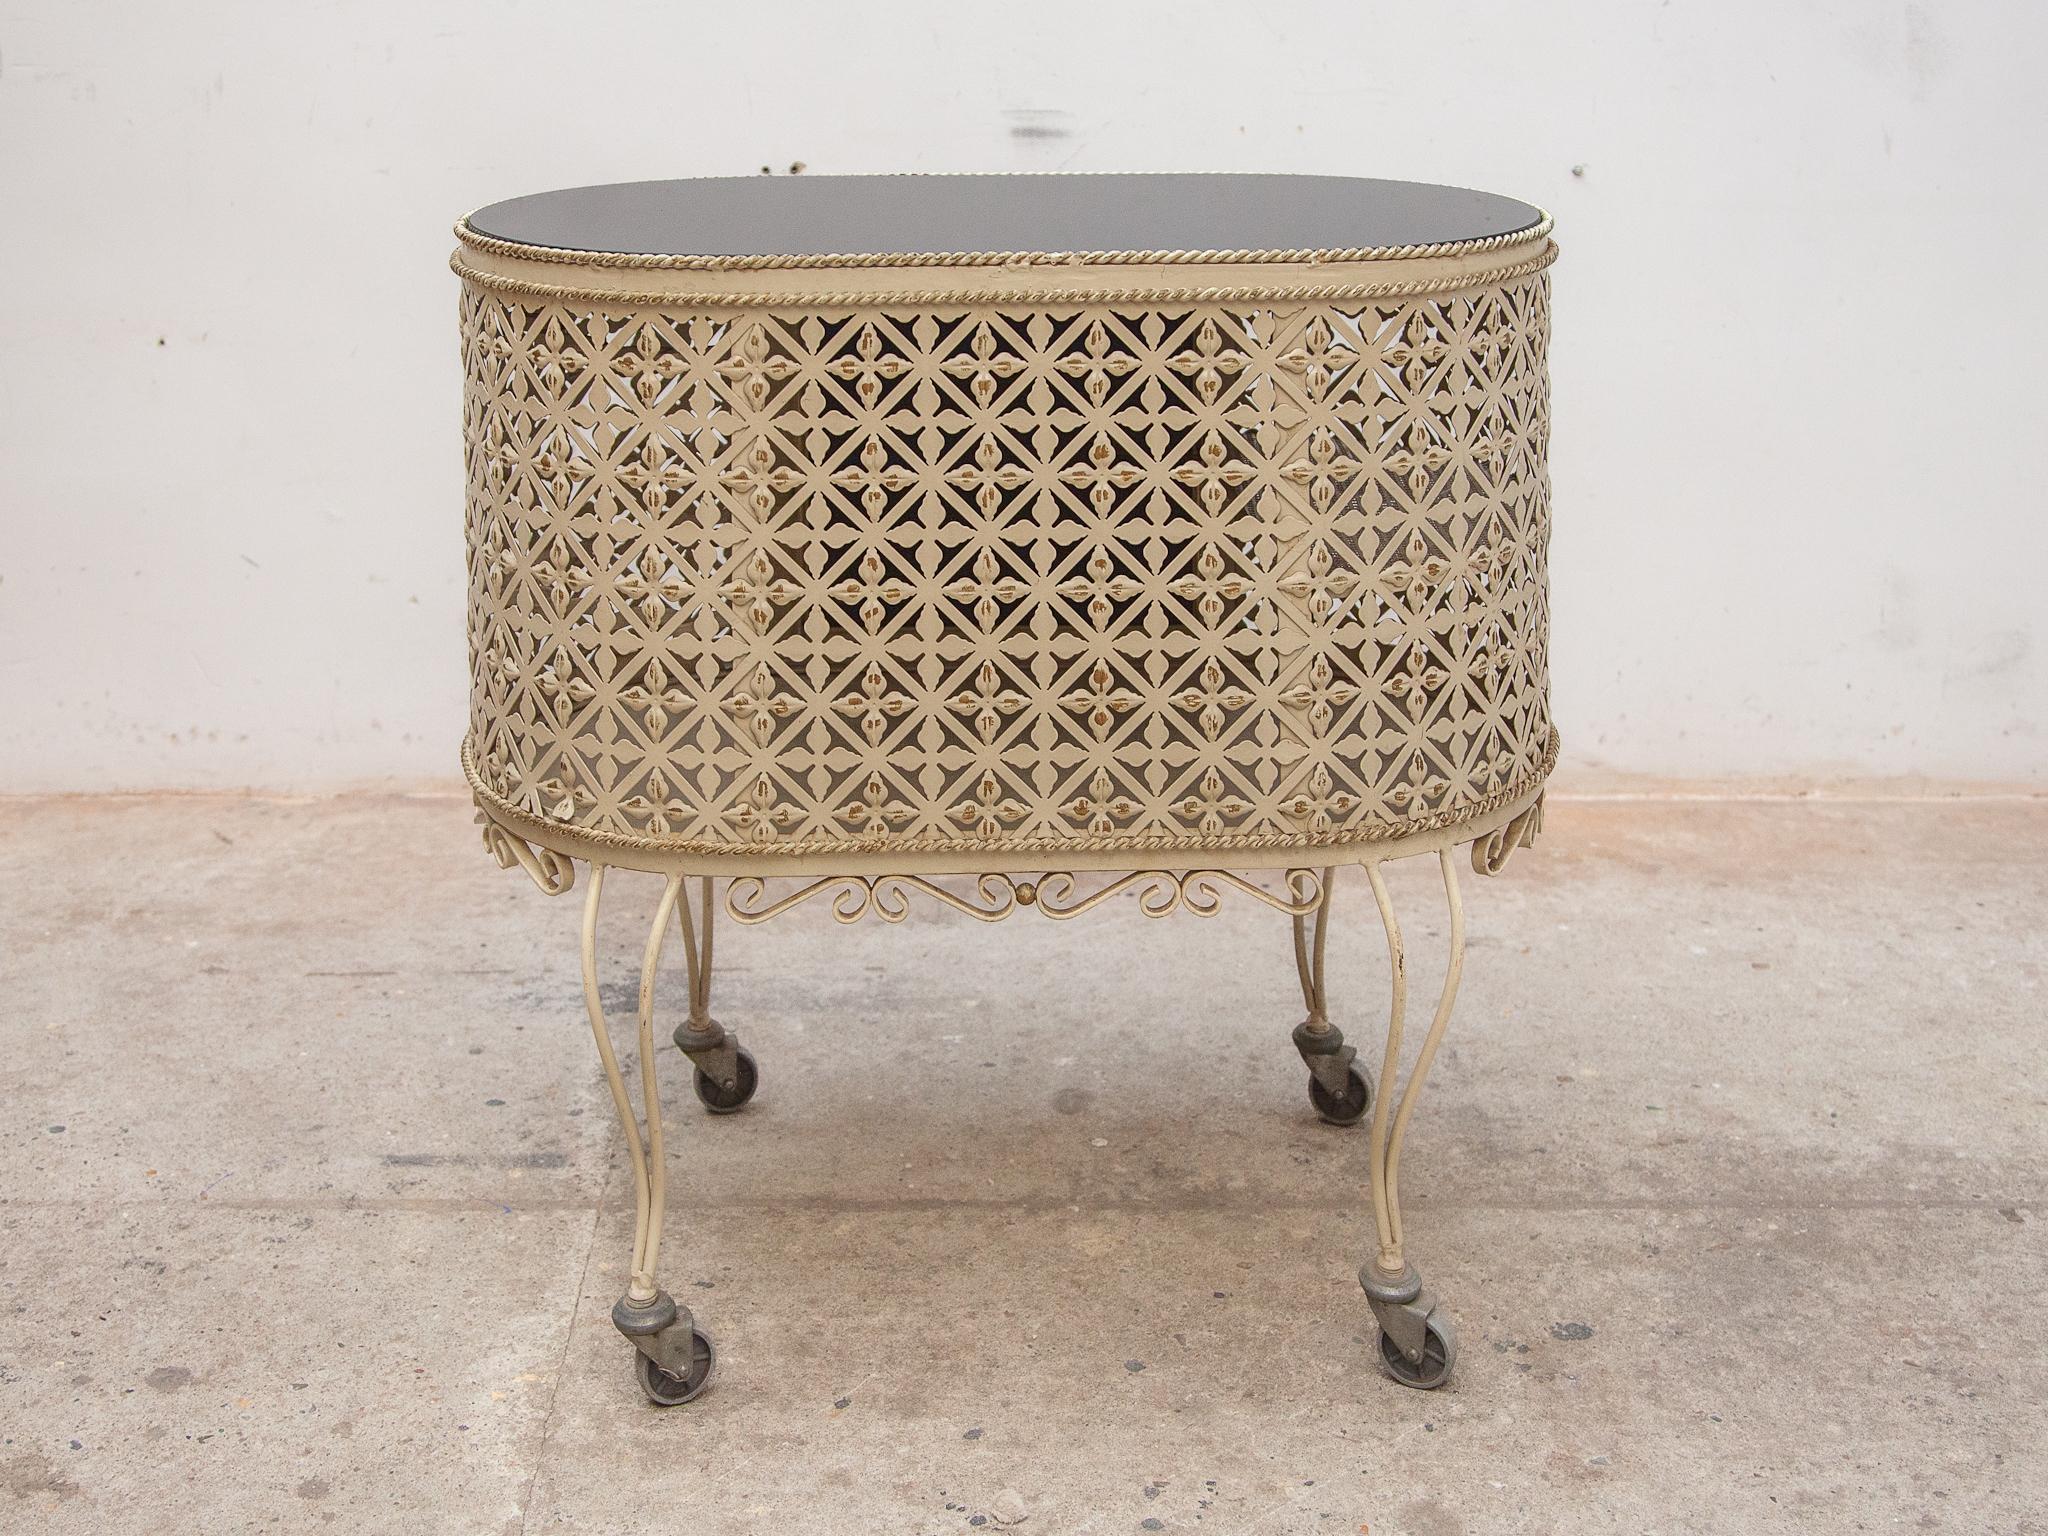  Mathieu Matégot style Perforated Metal Bar Cart or Serving Table, 1950s In Good Condition For Sale In Antwerp, BE